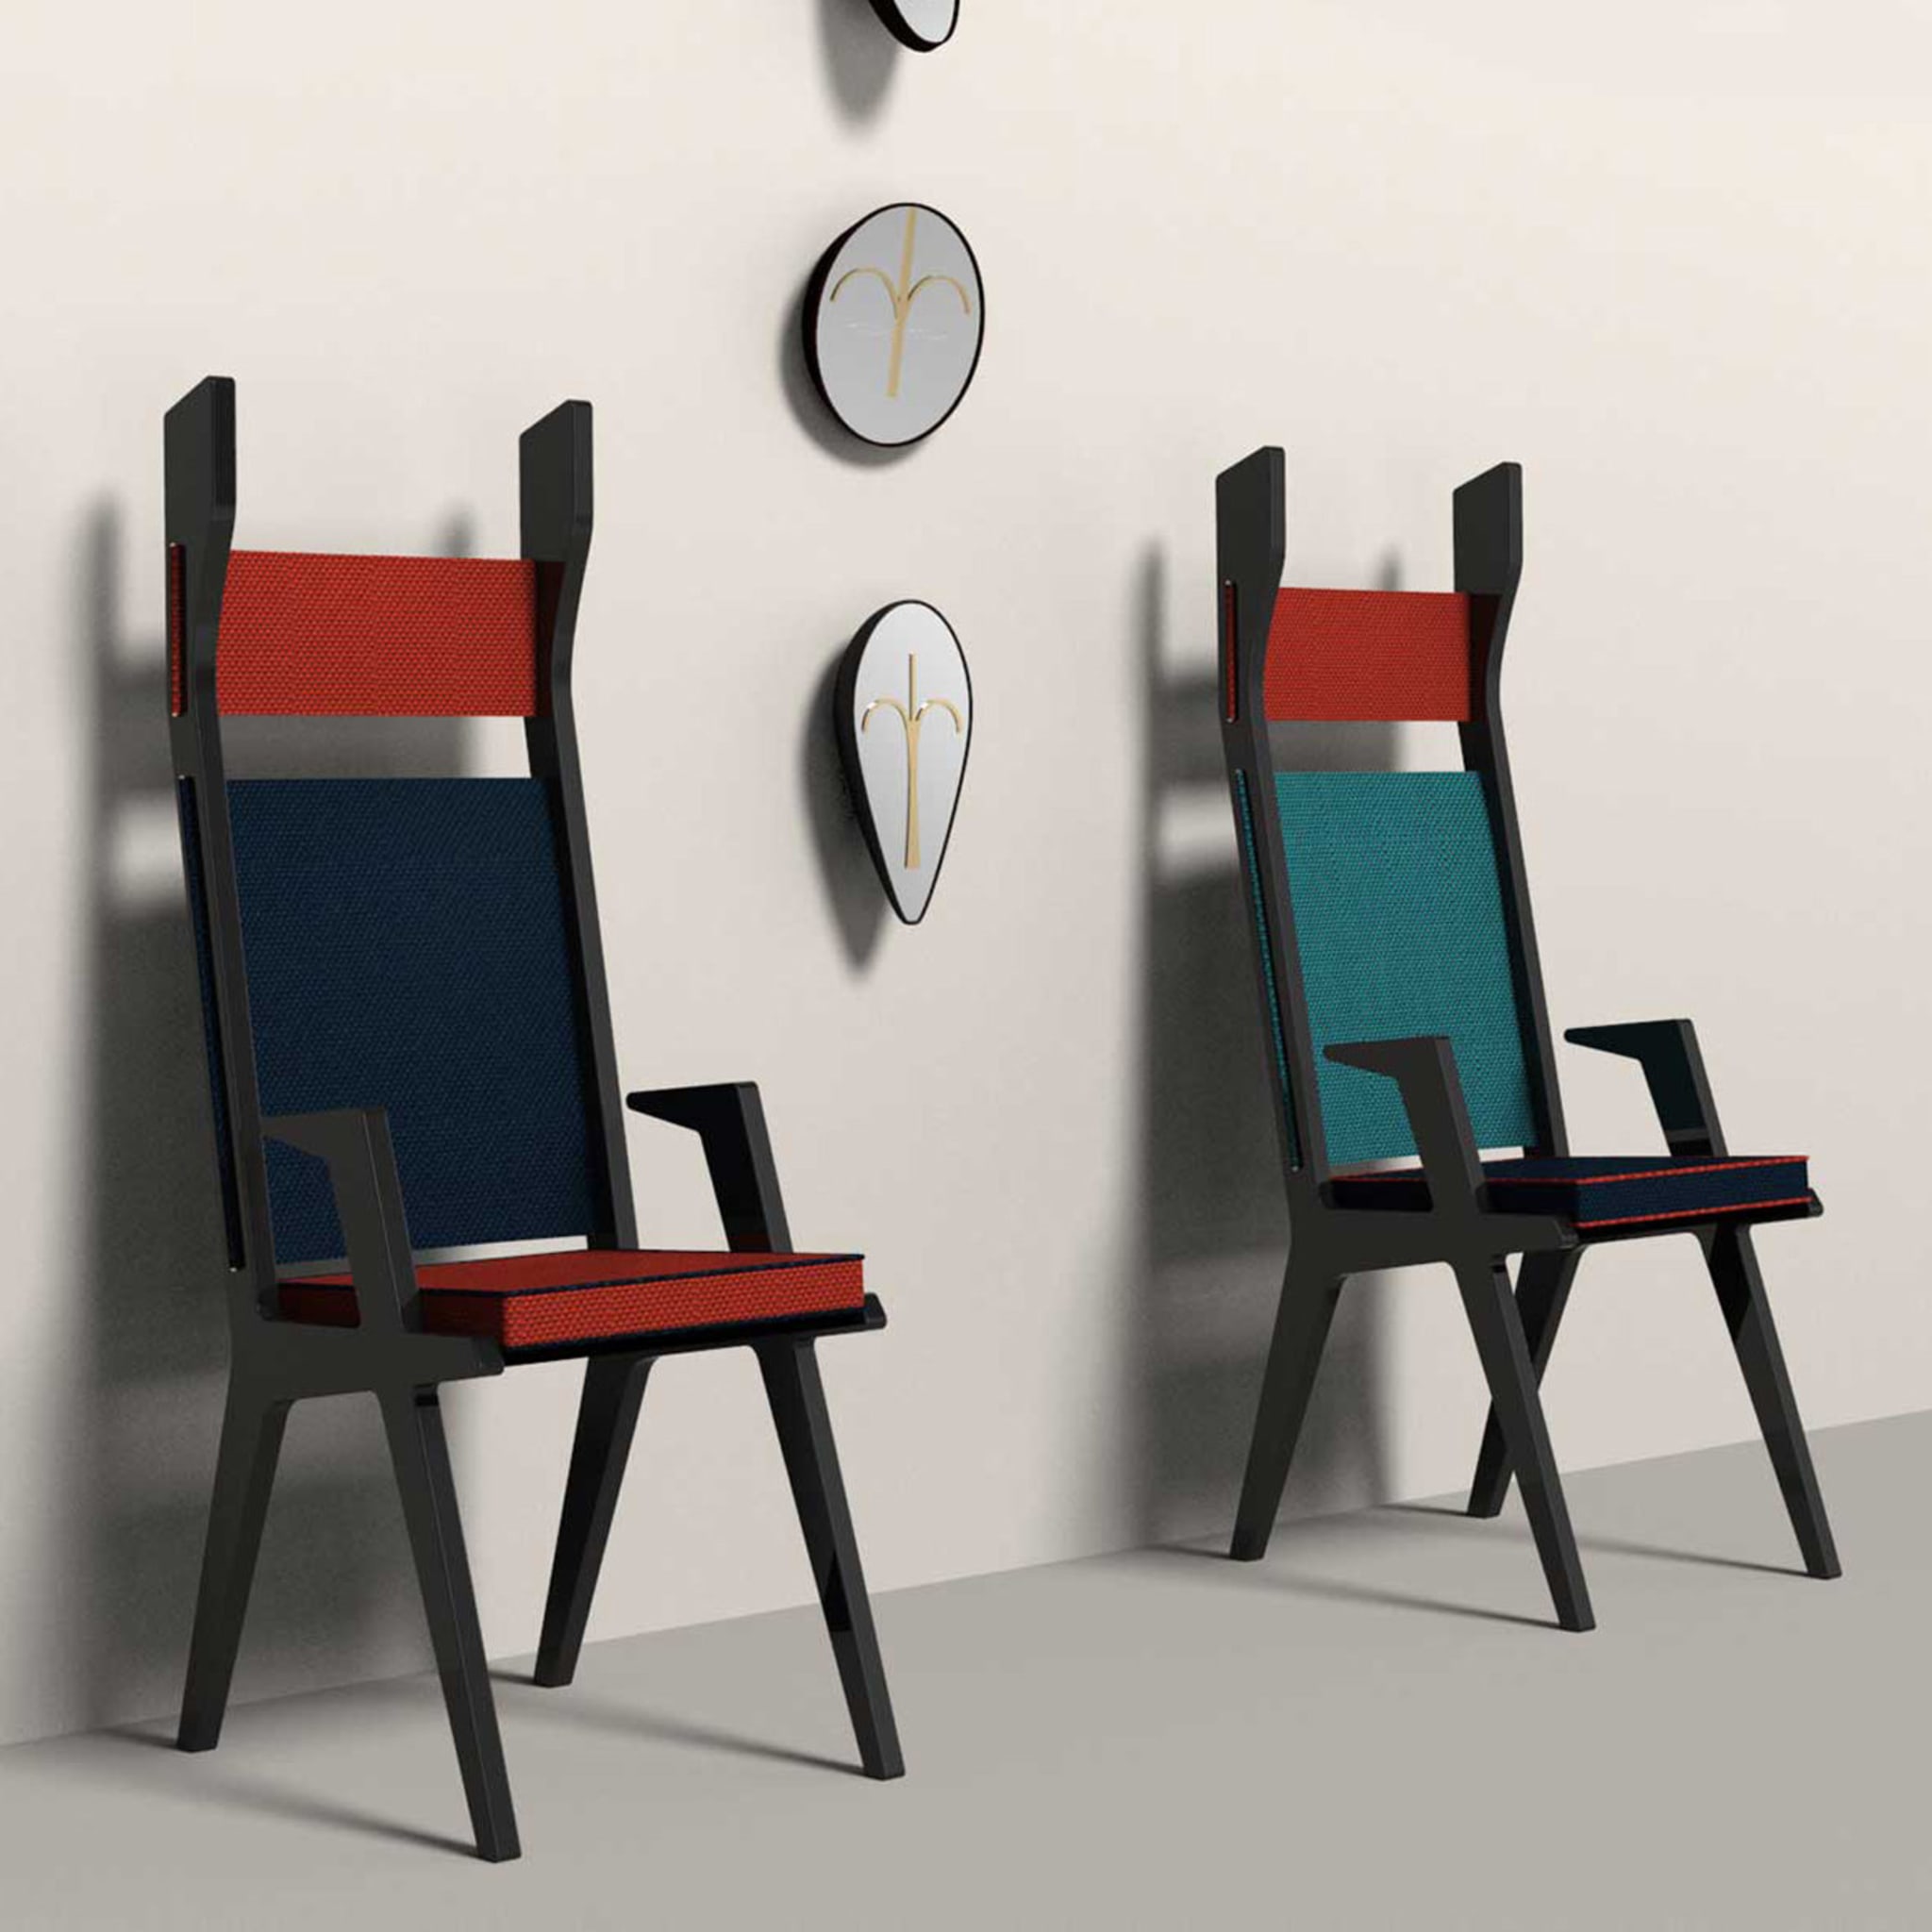 Colette Blue and Red Chair - Alternative view 1